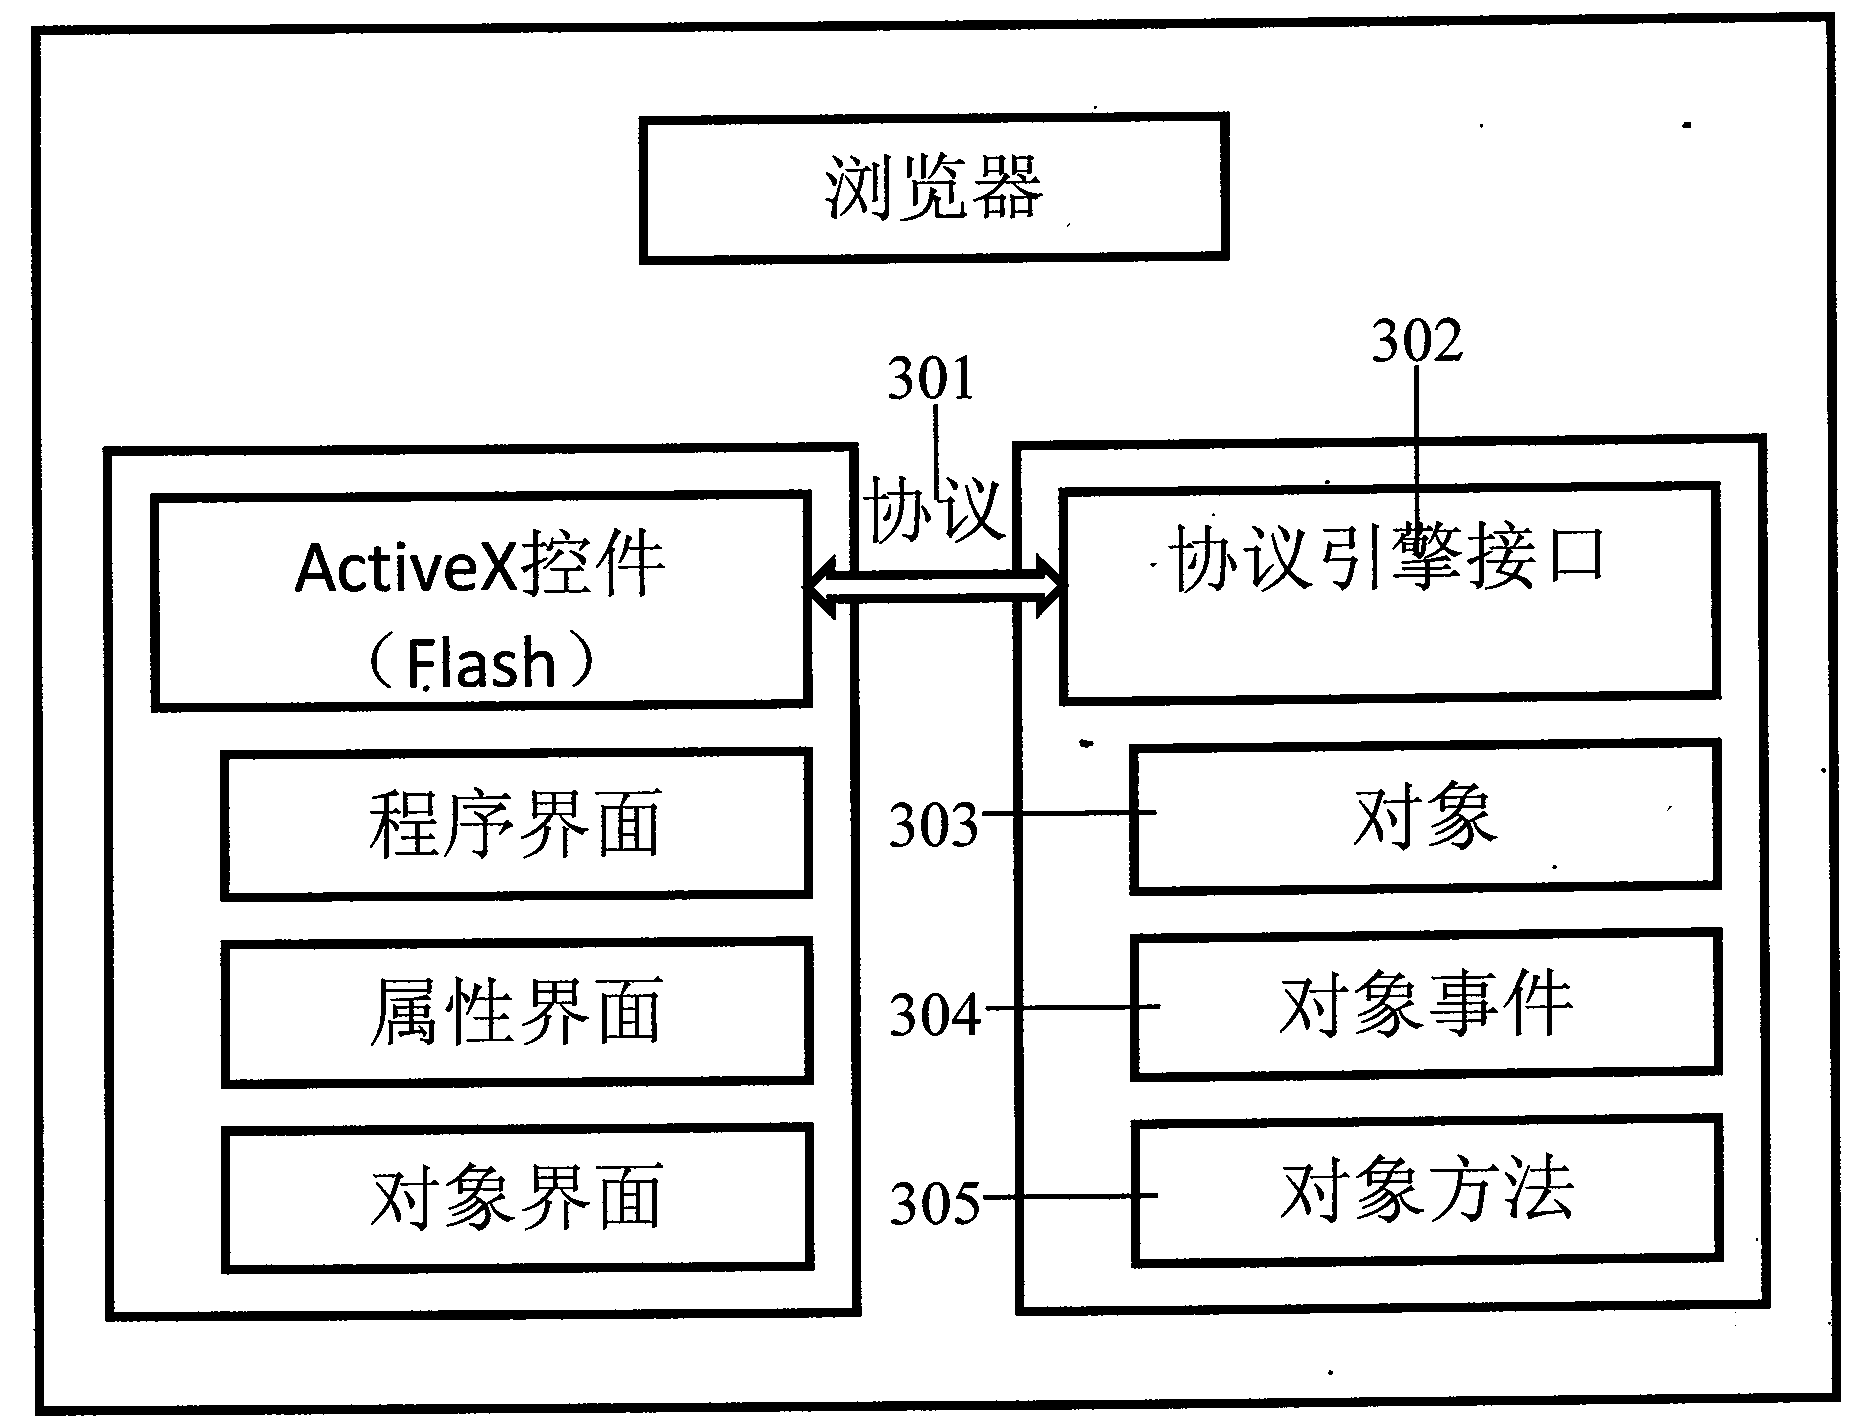 Method and system for interaction of video elements and web page elements in web pages